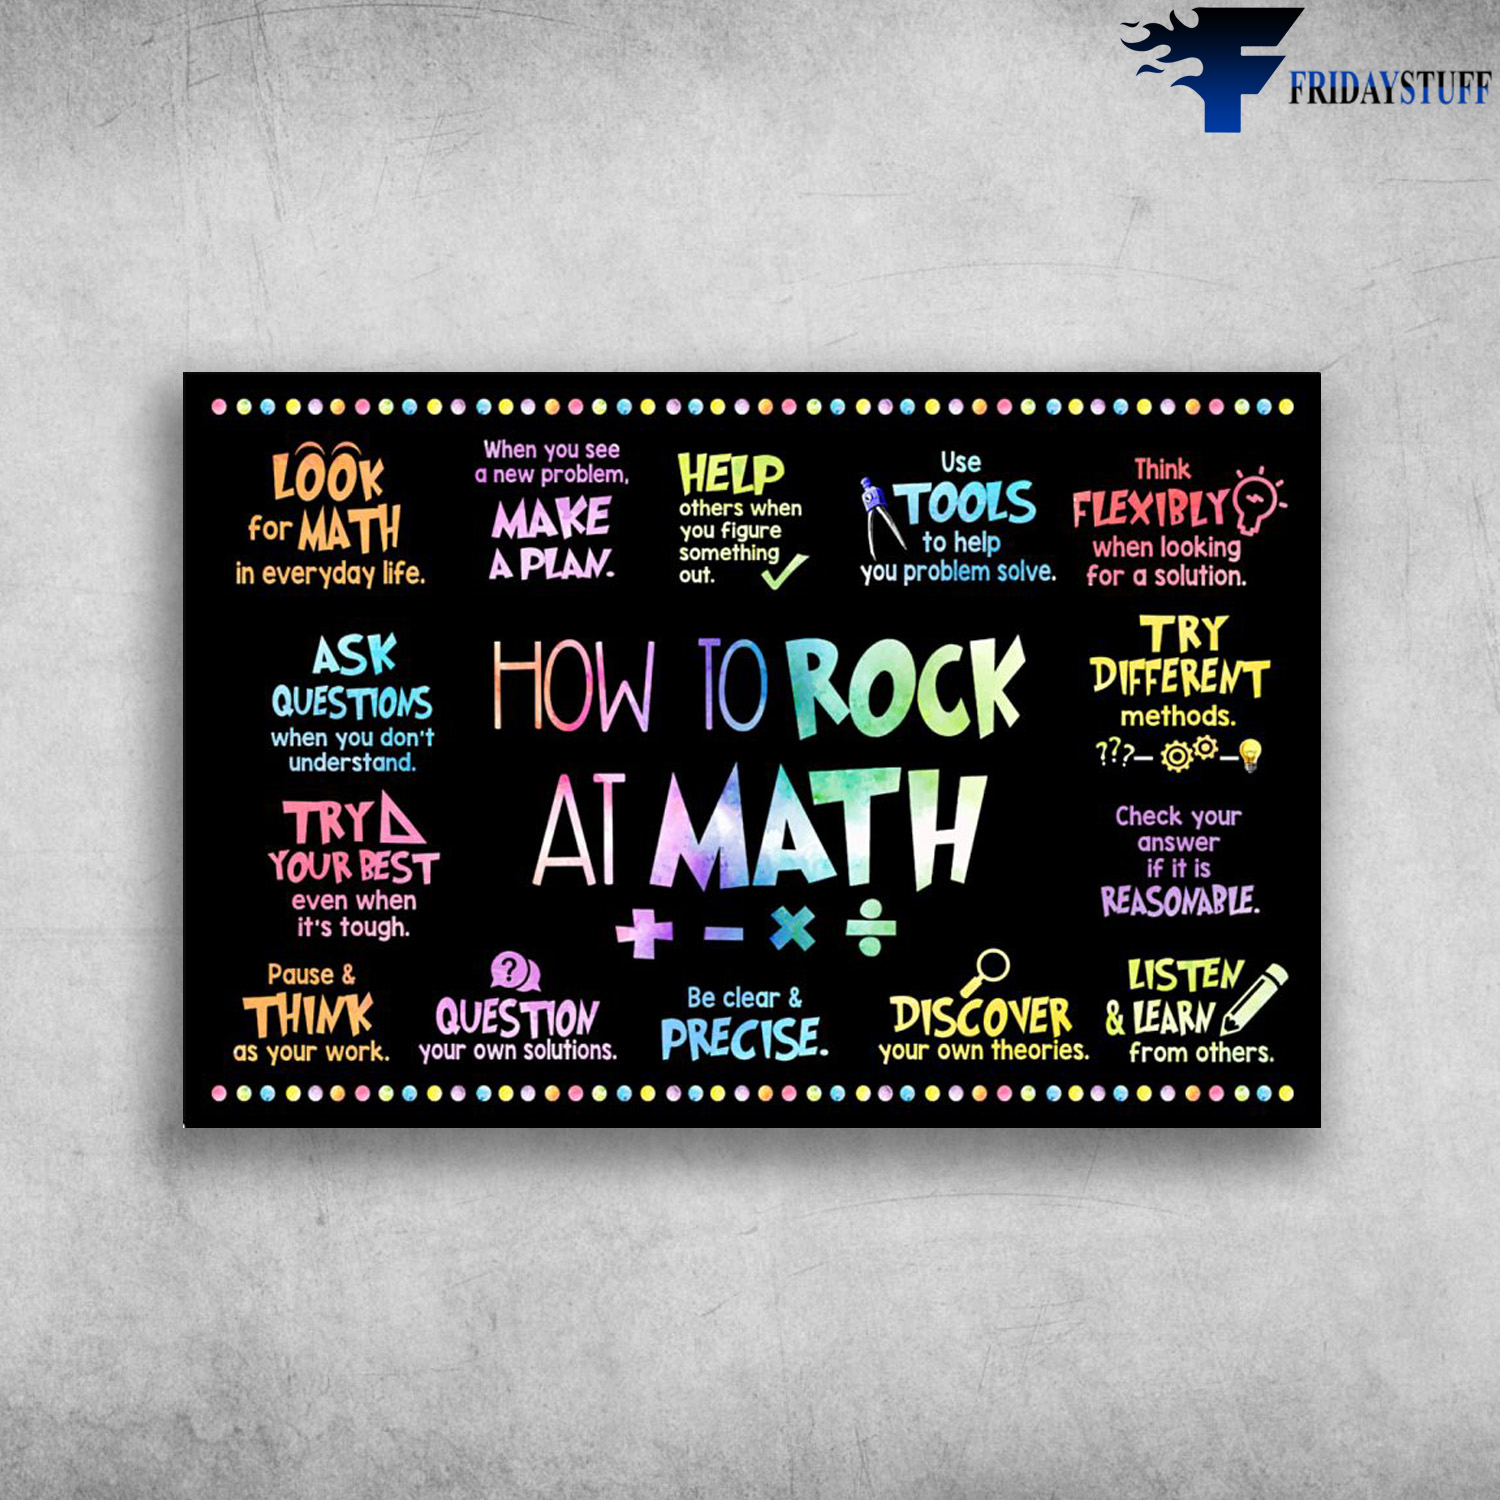 Math Poster - How To Rock At Math, Look For Math In Everyday Life, When You See A New Problem, Make A Plan, Hepl Pthers When You Figure Something Out, Use Tools To Help You Problem Solve, Think Flexibly When Looking For A Solution